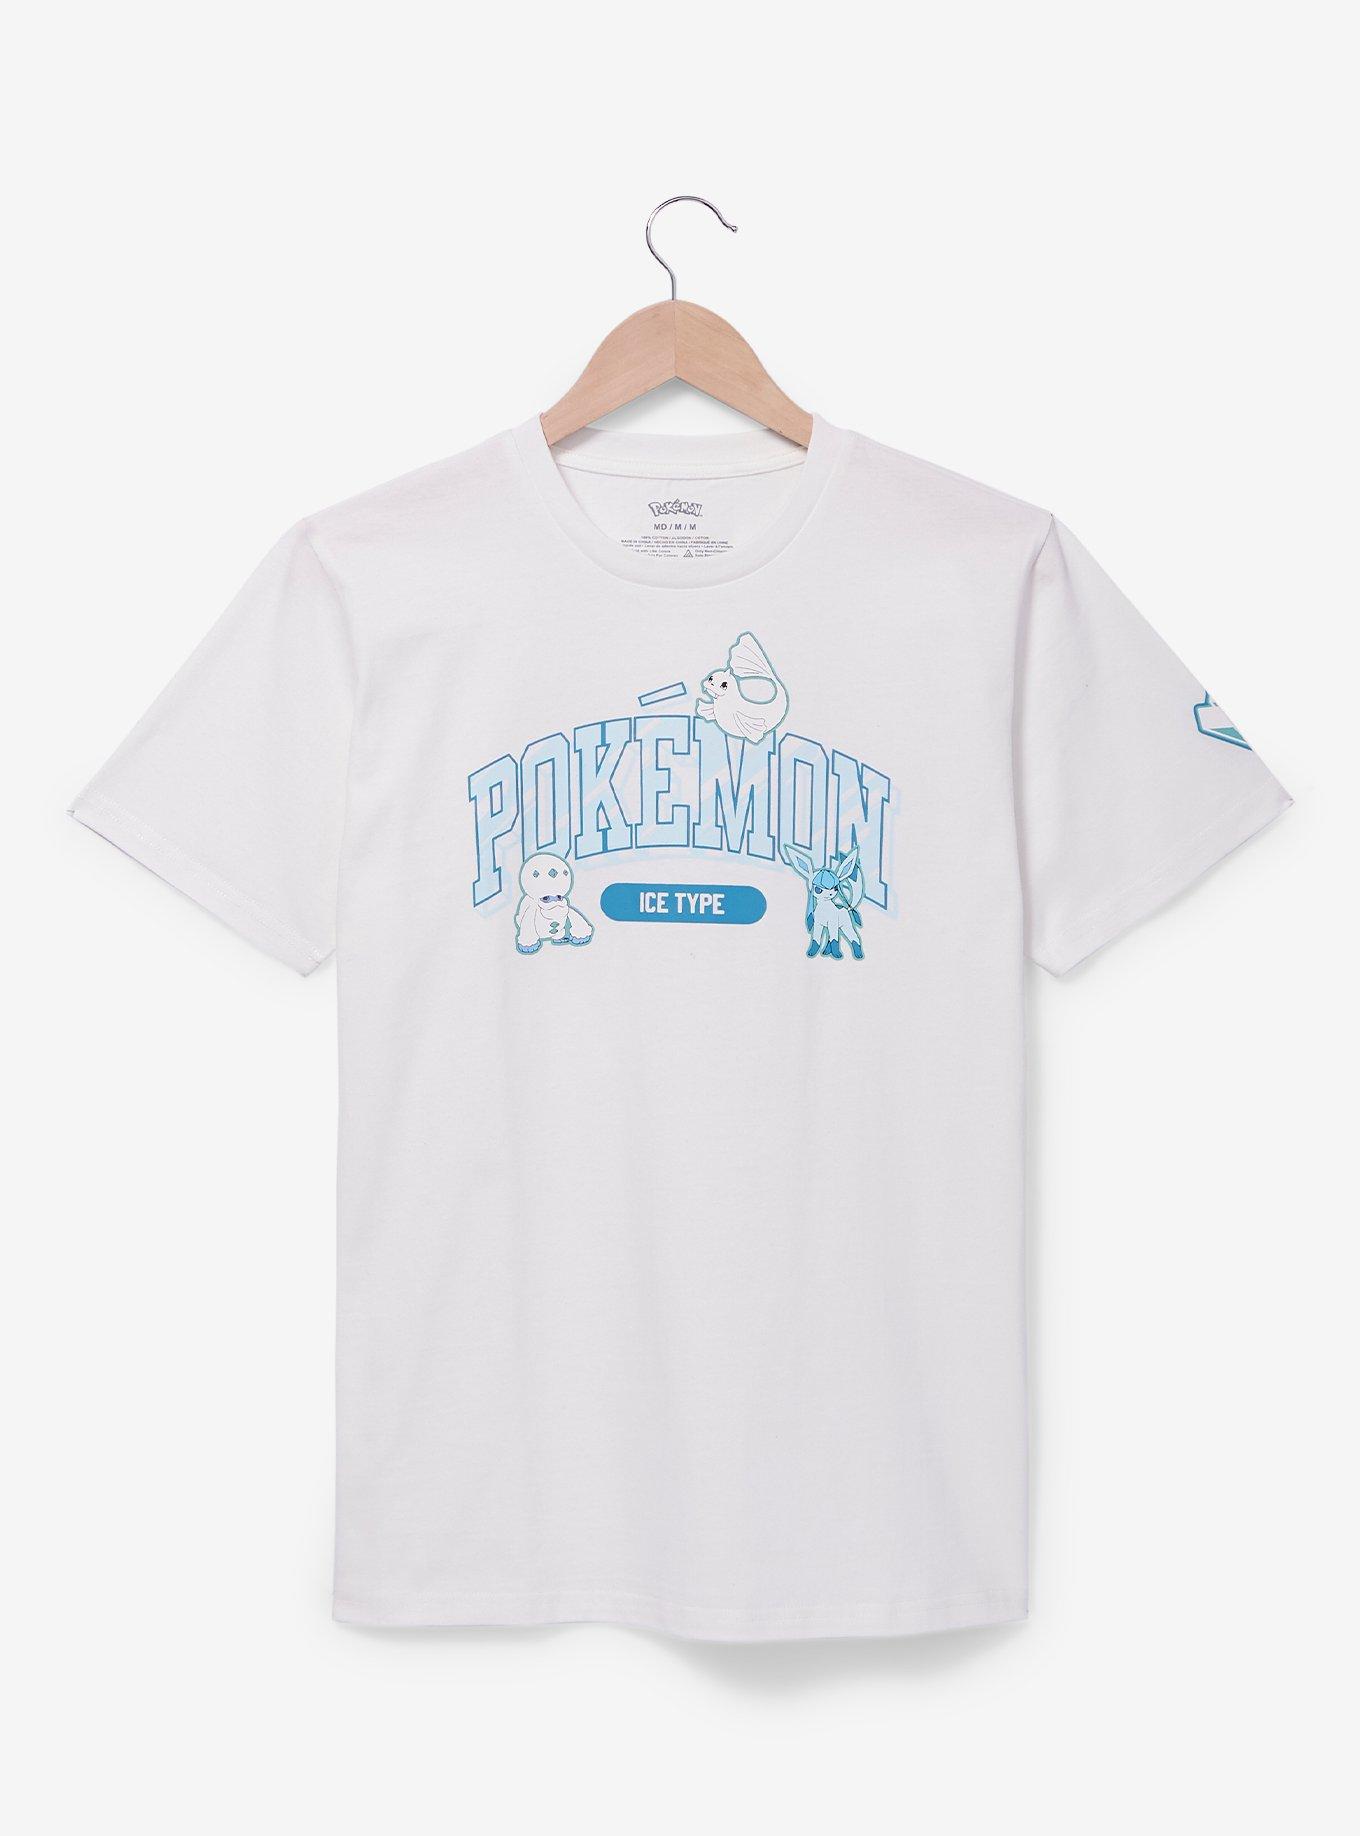 Pokémon Ice Type Women's T-Shirt - BoxLunch Exclusive | BoxLunch